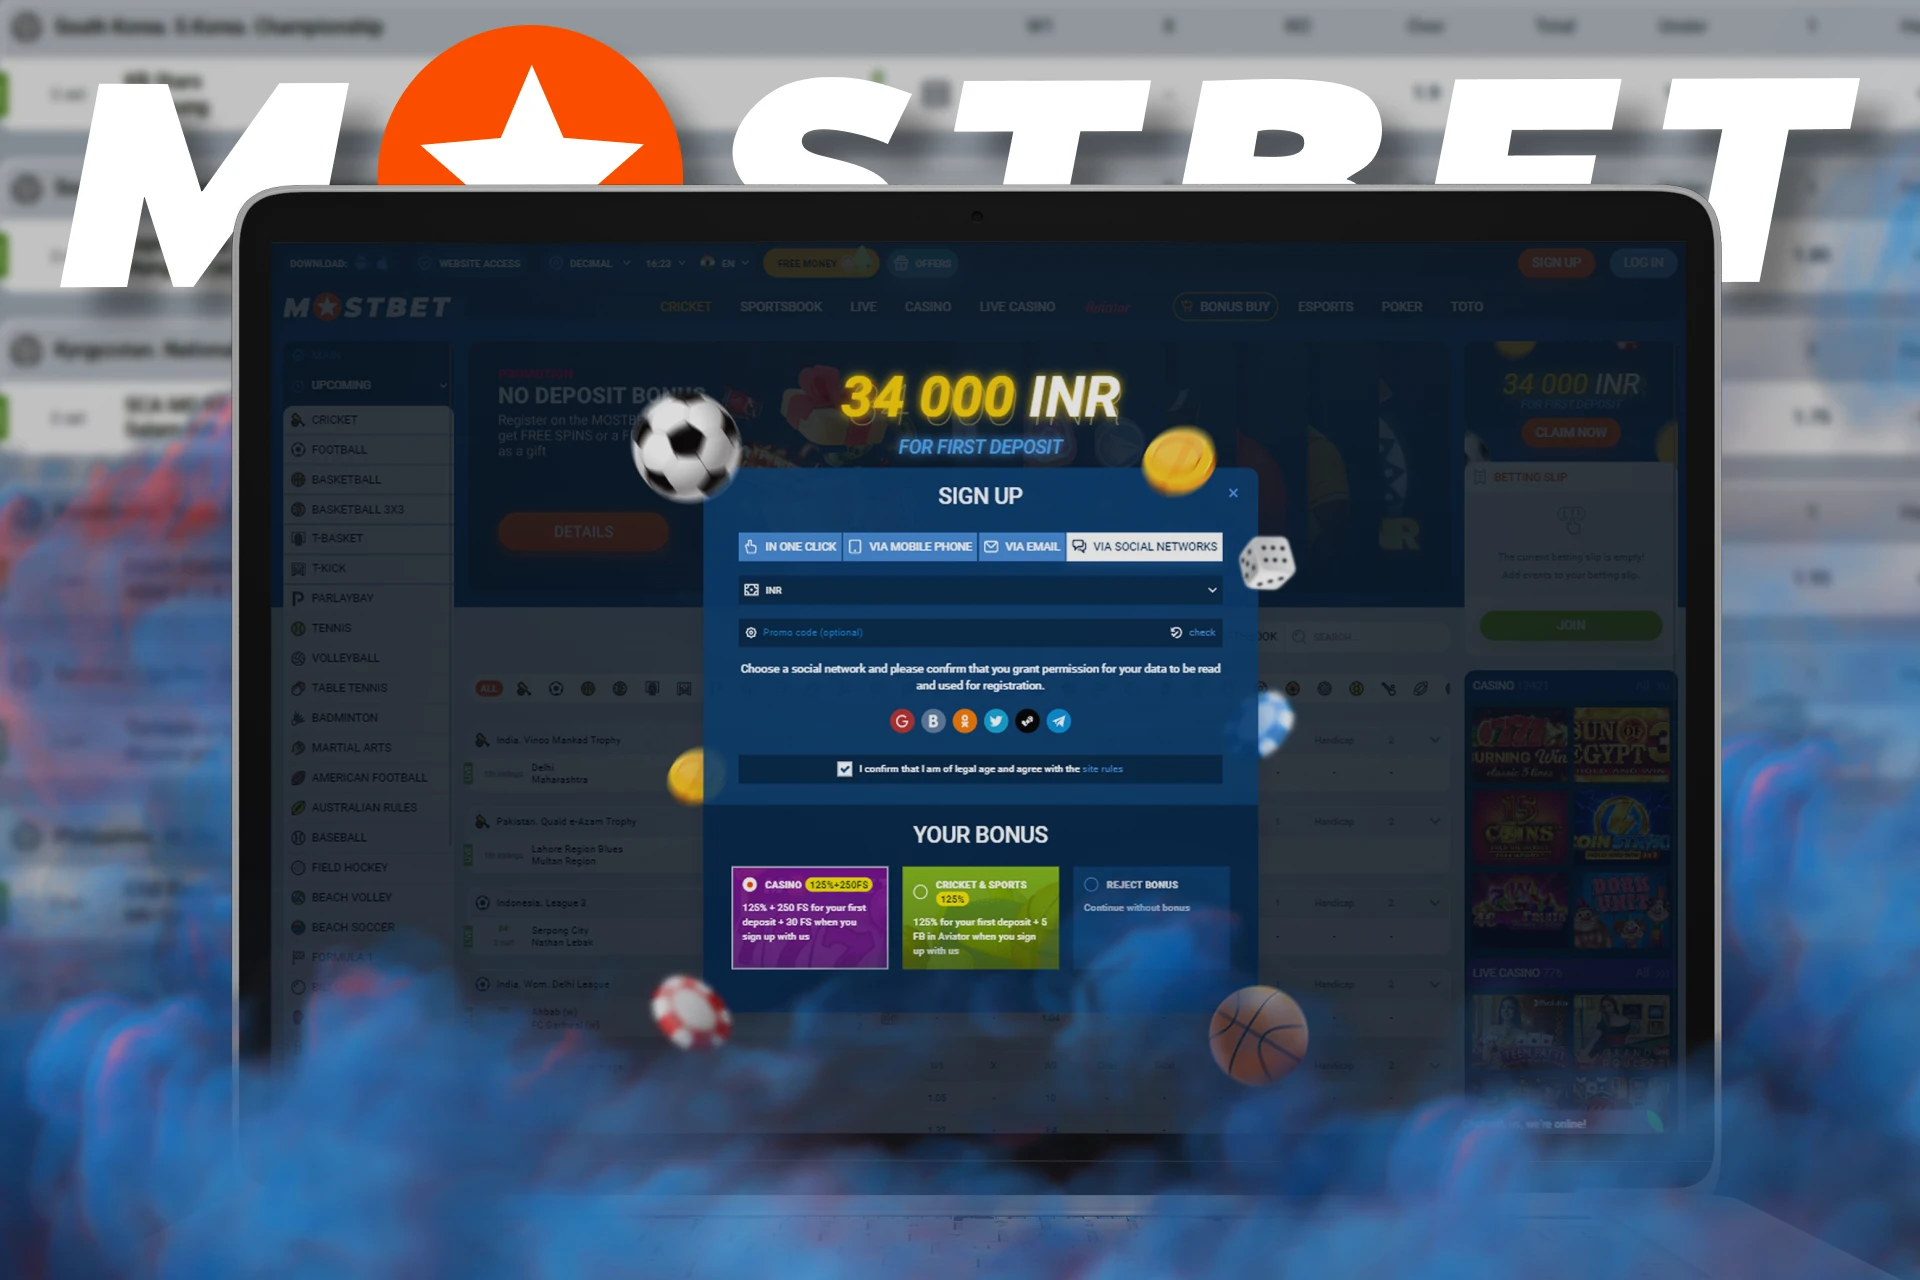 You can register with Mostbet via social networks.